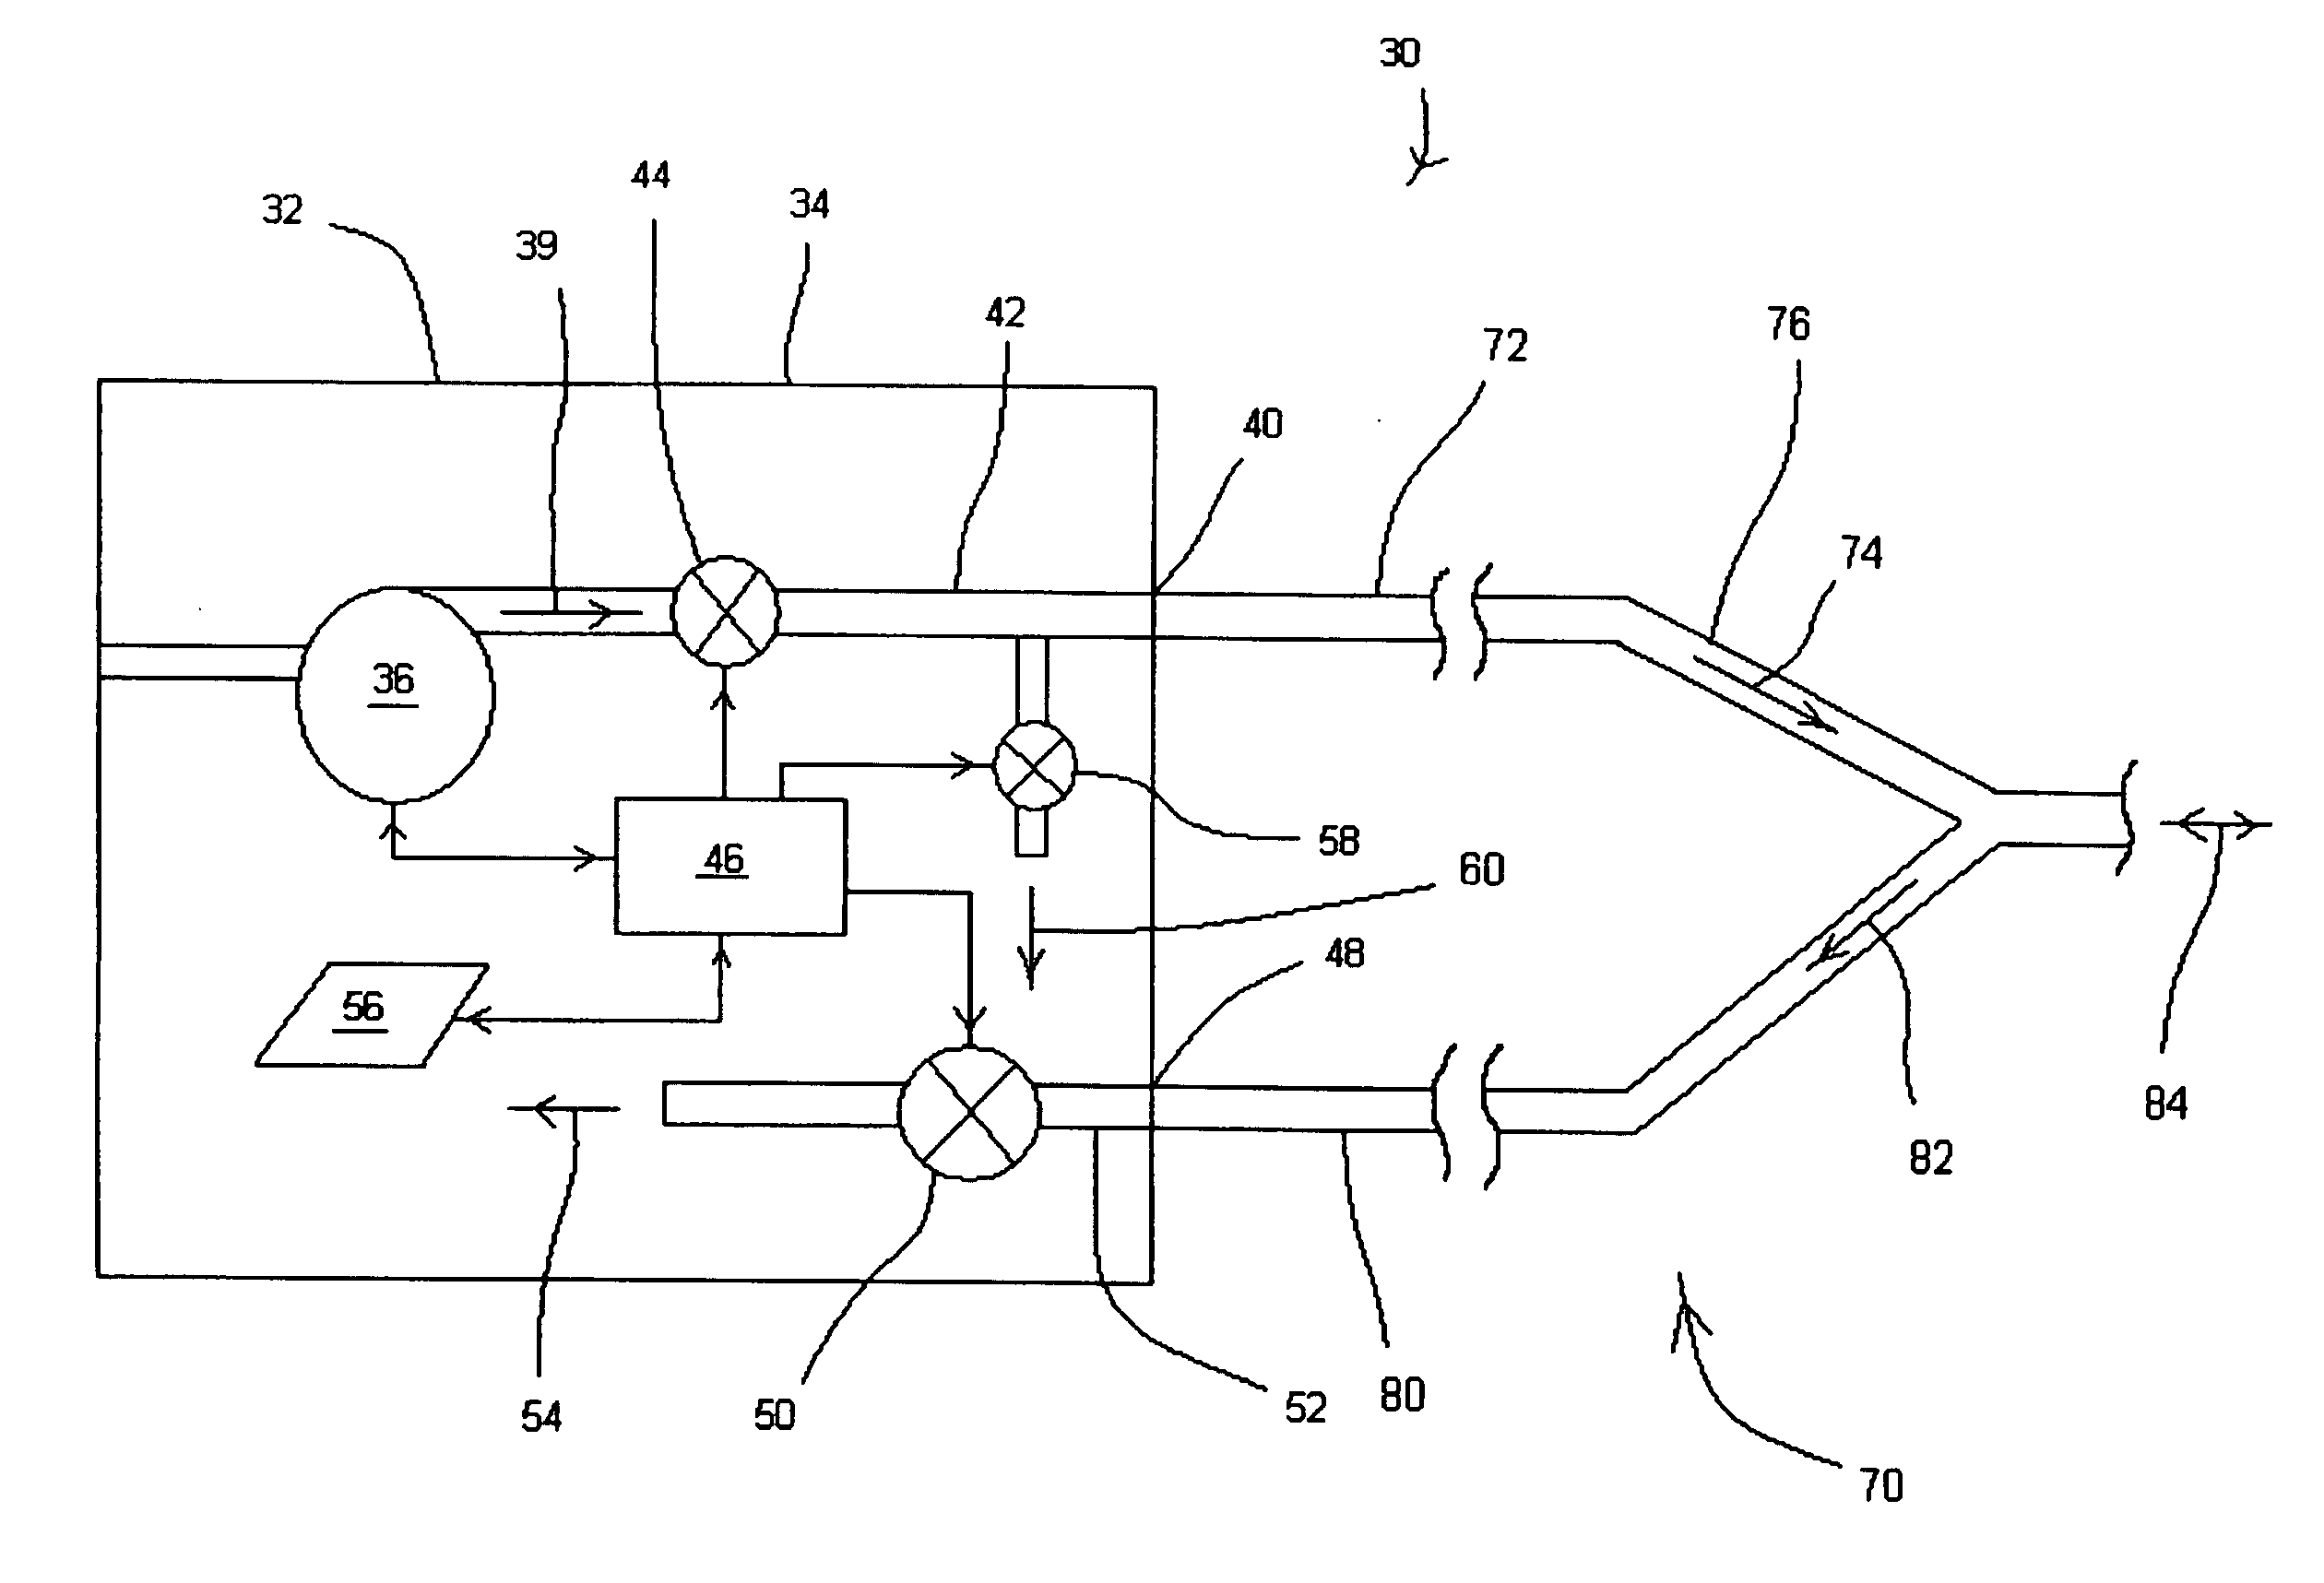 Ventilator adaptable for use with either a dual-limb circuit or a single-limb circuit